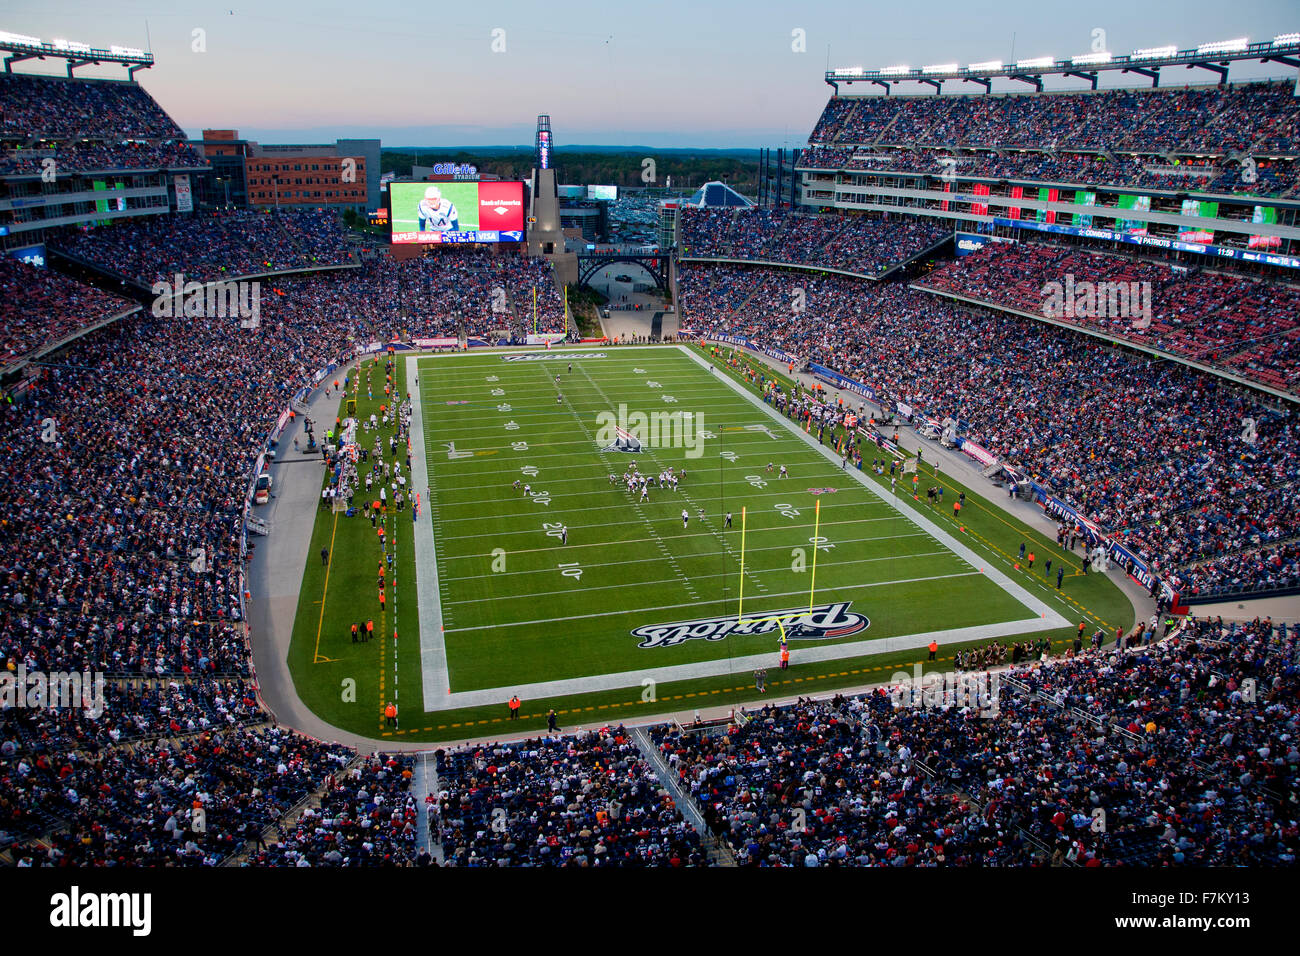 Elevated view of Gillette Stadium, home of Super Bowl champs, New England Patriots, NFL Team play against Dallas Cowboys,October 16, 2011, Foxborough, Boston, MA Stock Photo